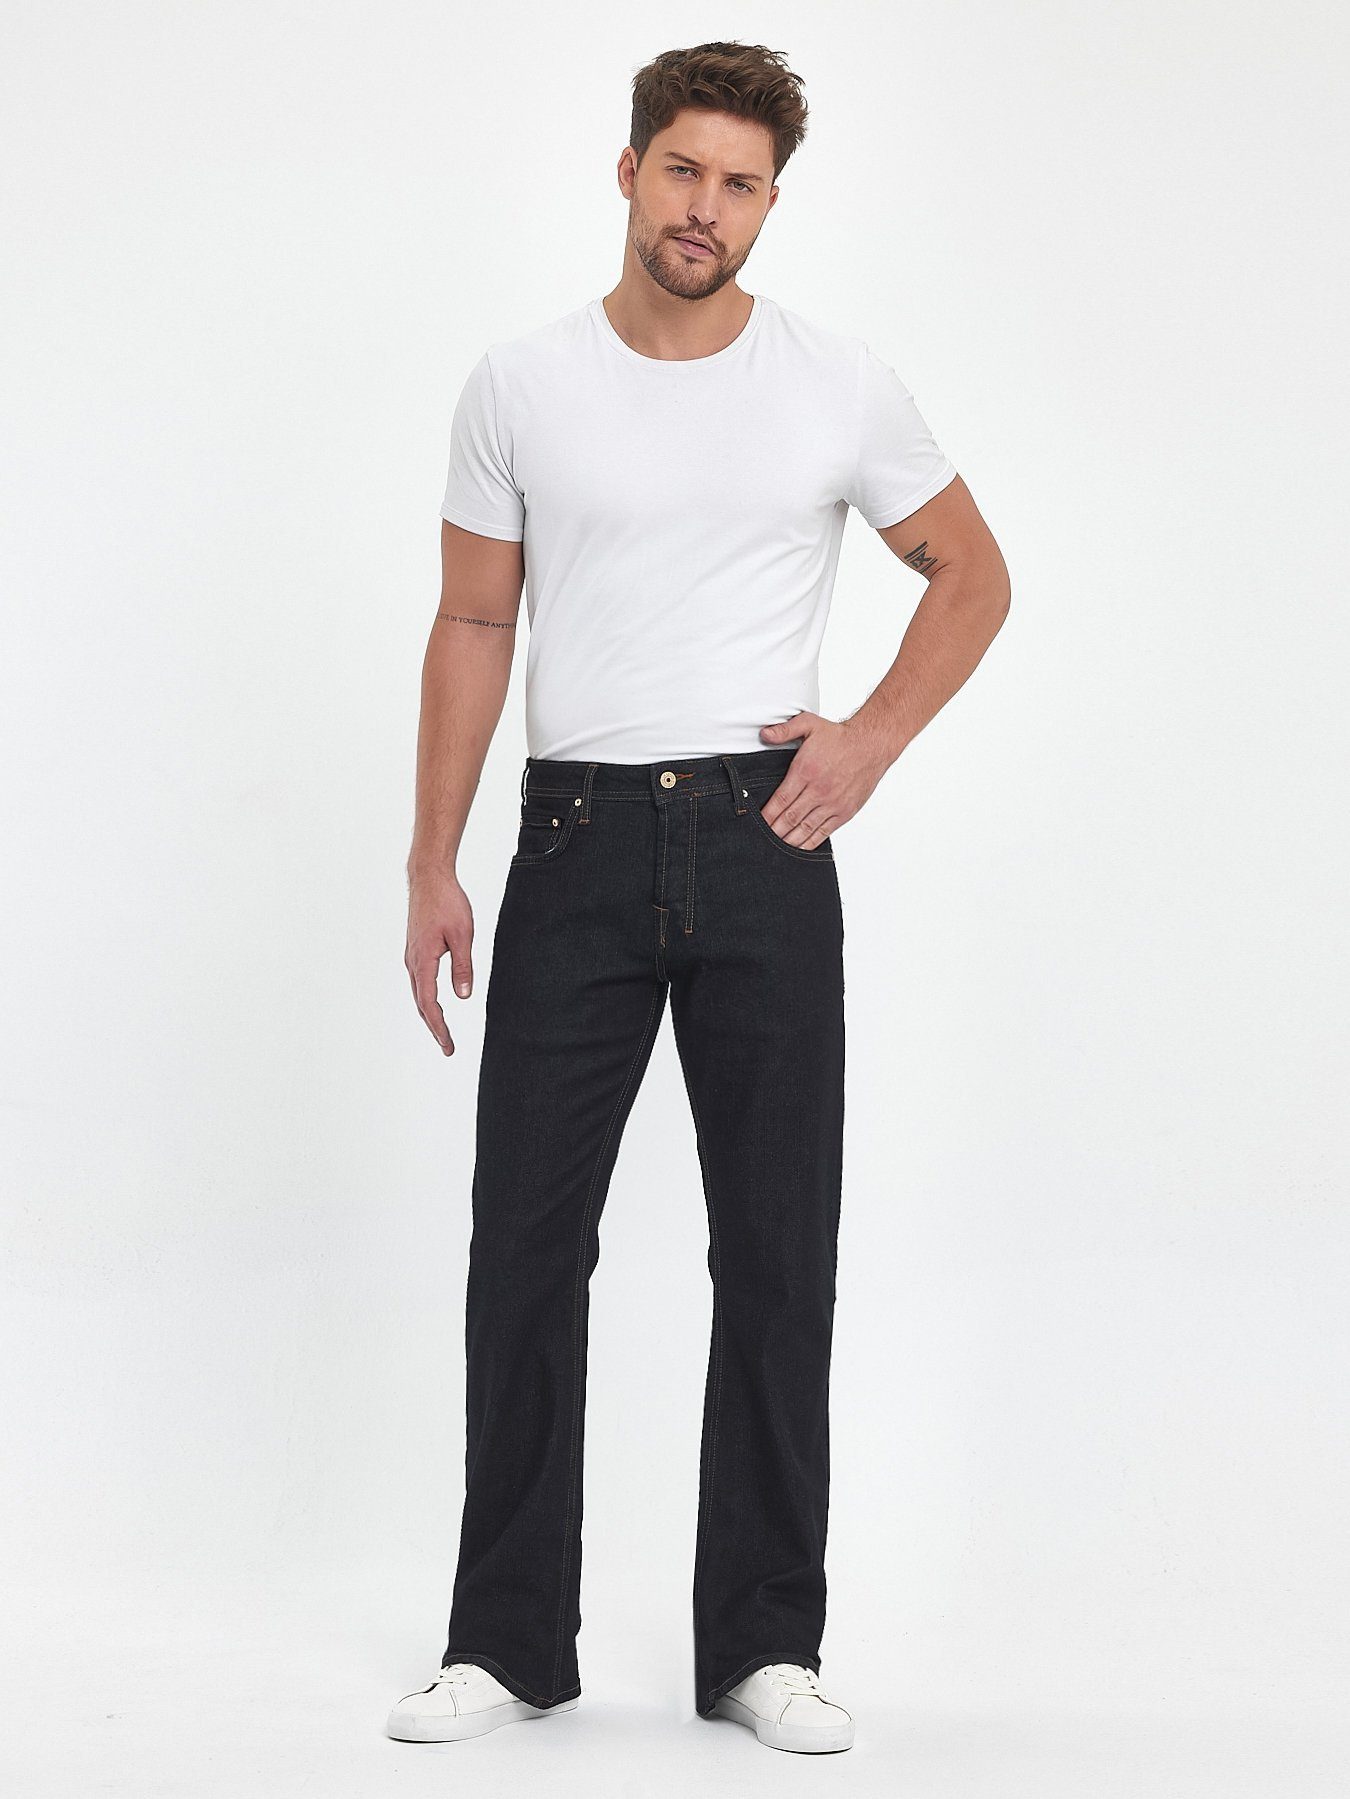 Jeans LTB Wash Bootcut-Jeans Waterless LTB Tinman